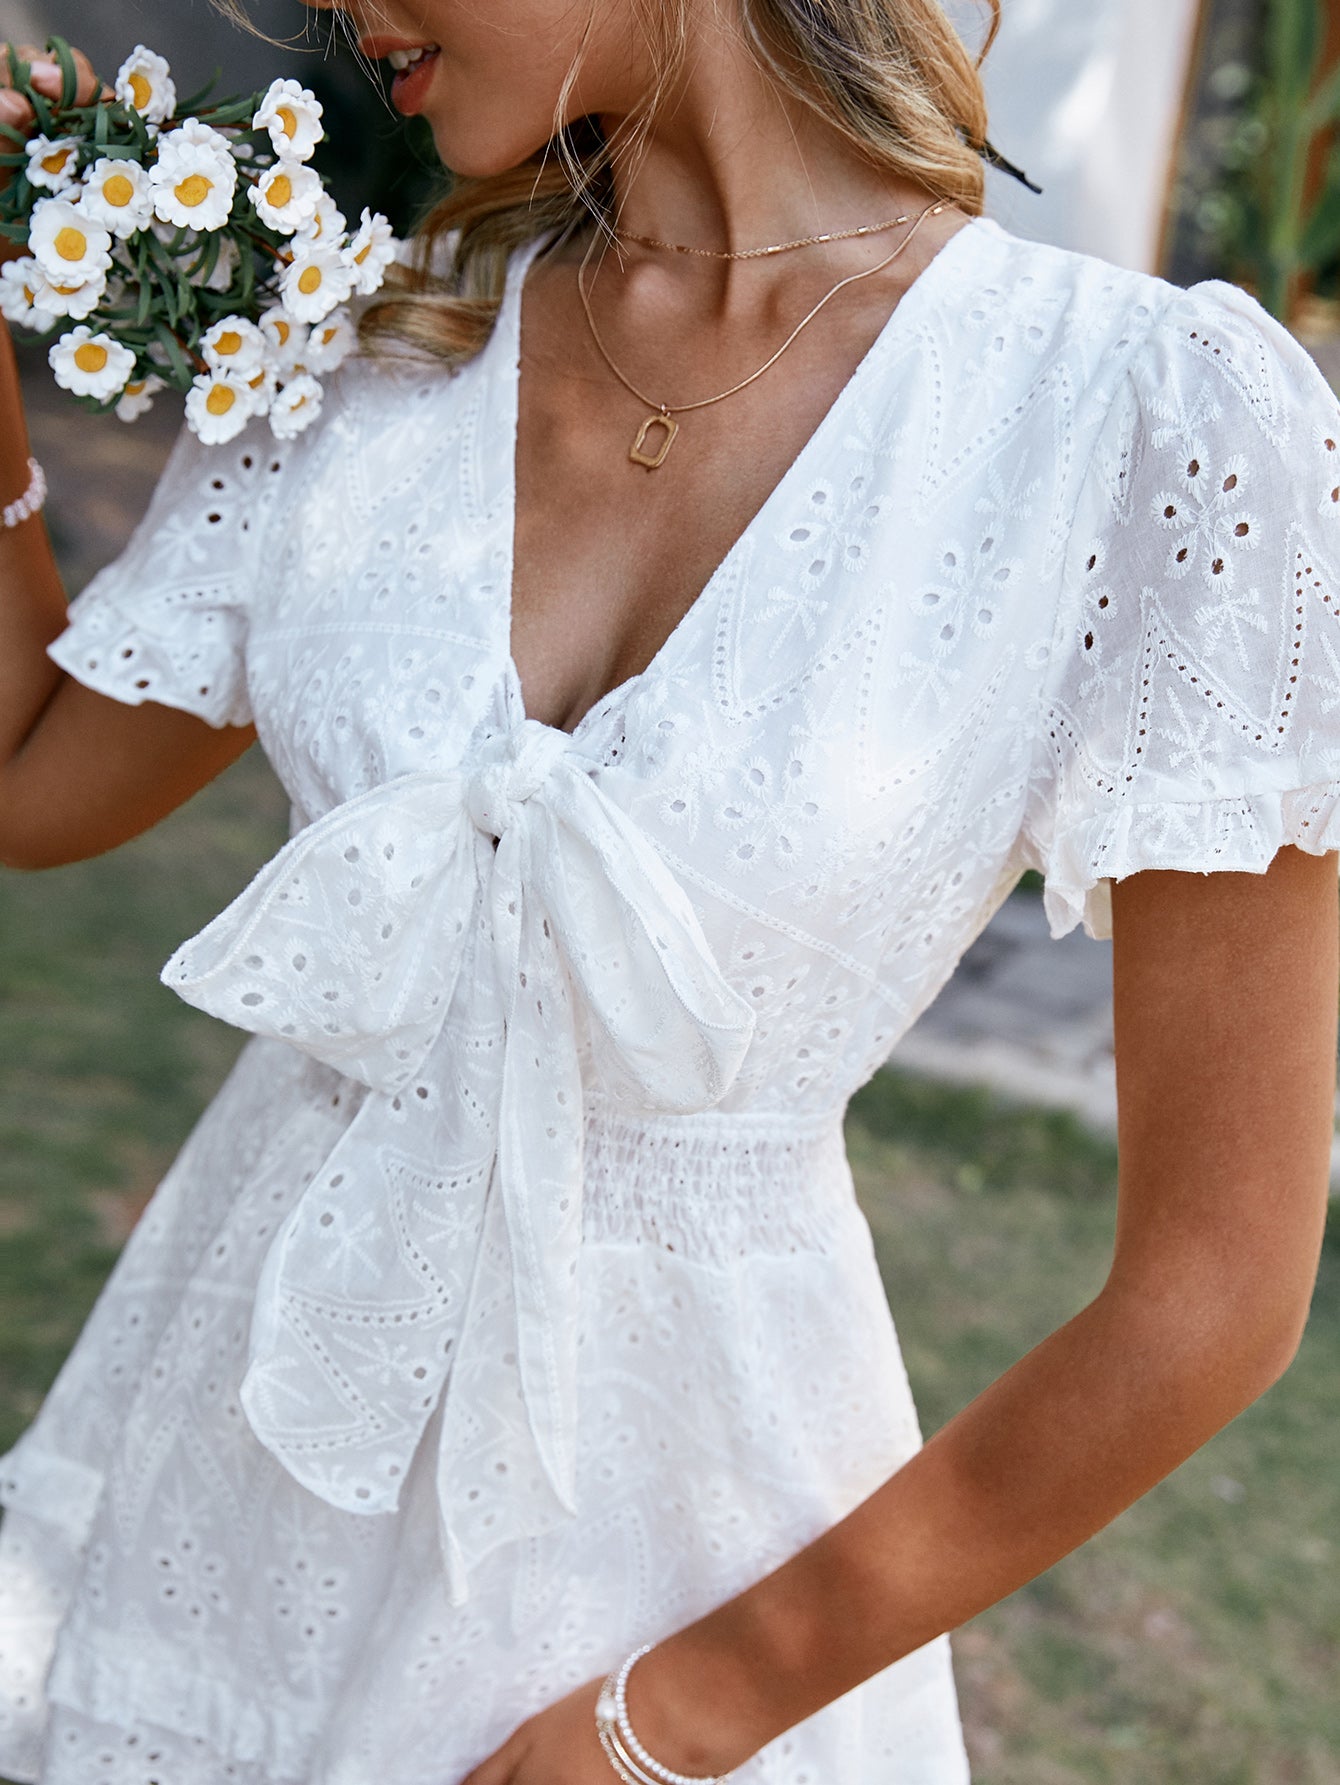 Mojoyce Cotton hollow out puff short sleeve women summer dress Holiday white bow beach mini sundress  A-line 2022 mujer vestidos